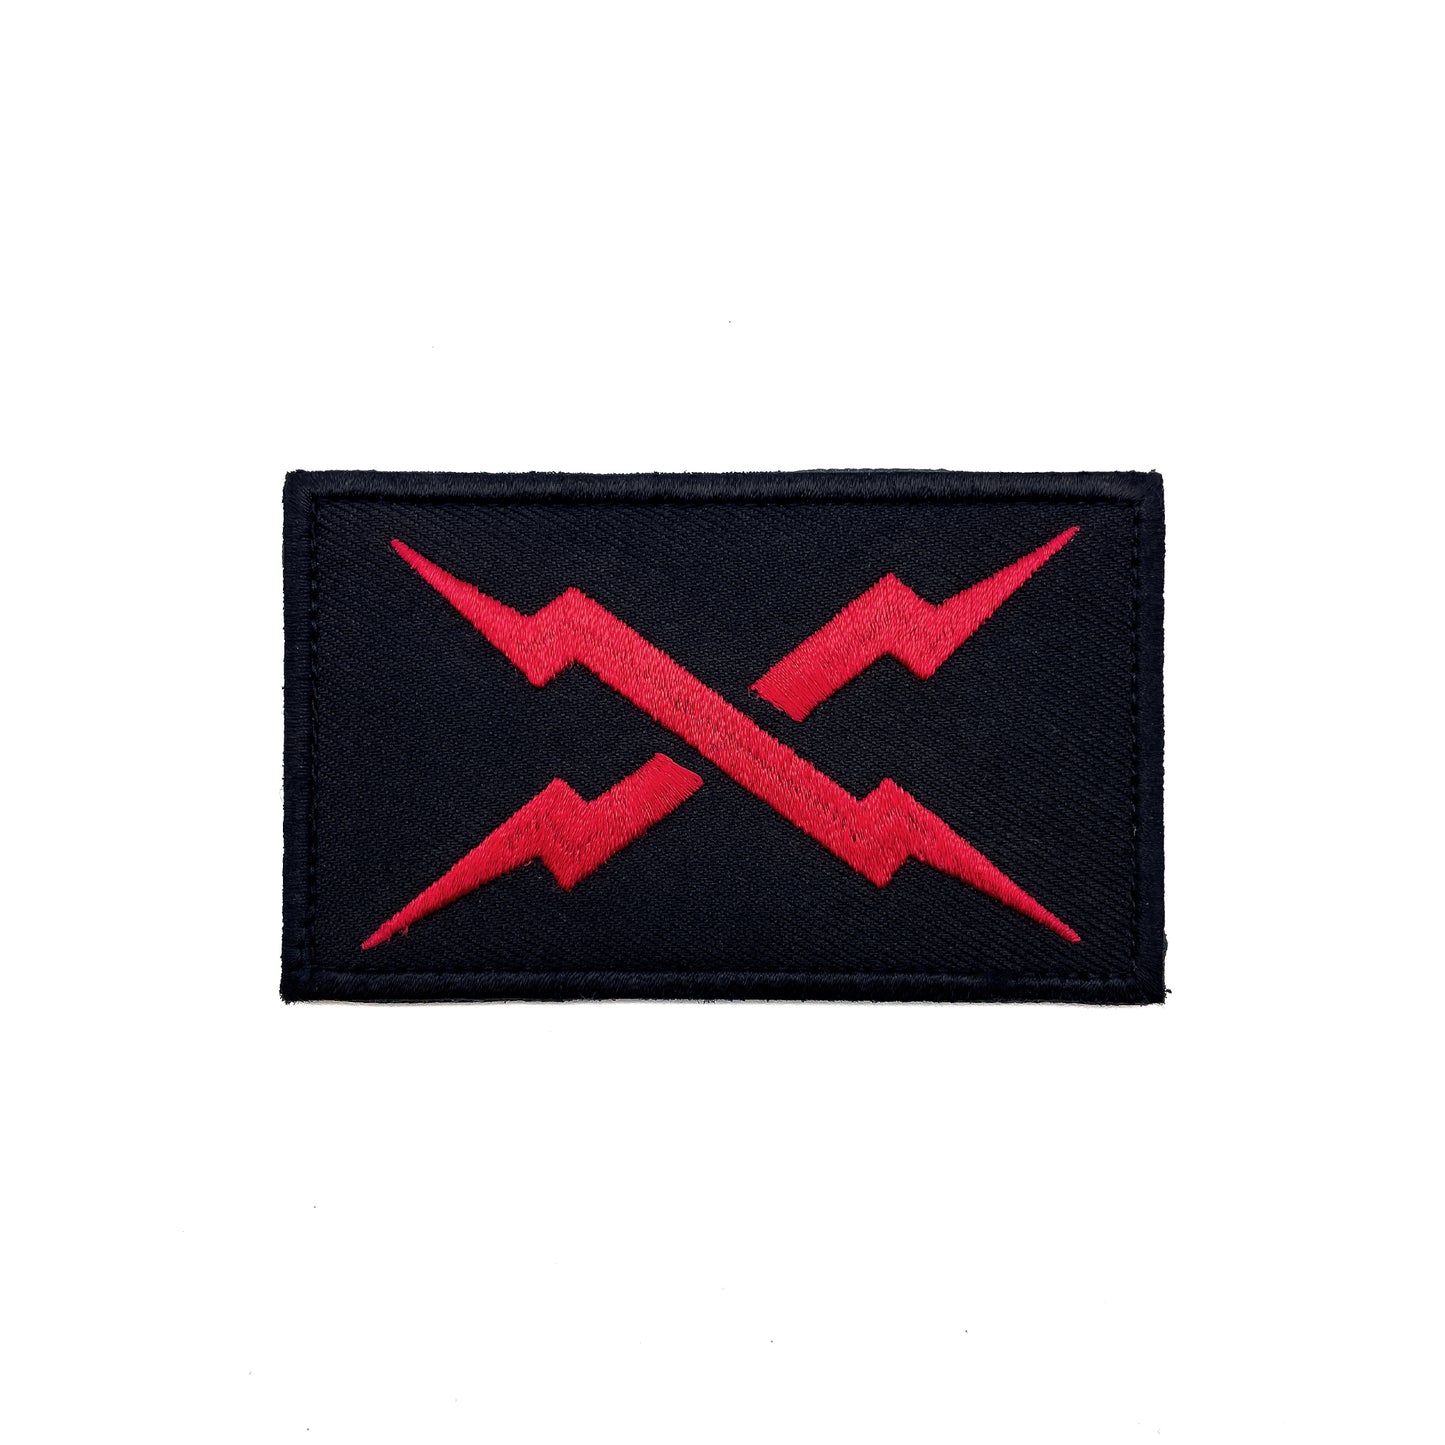 RED BOLT EMBROIDERED PATCH